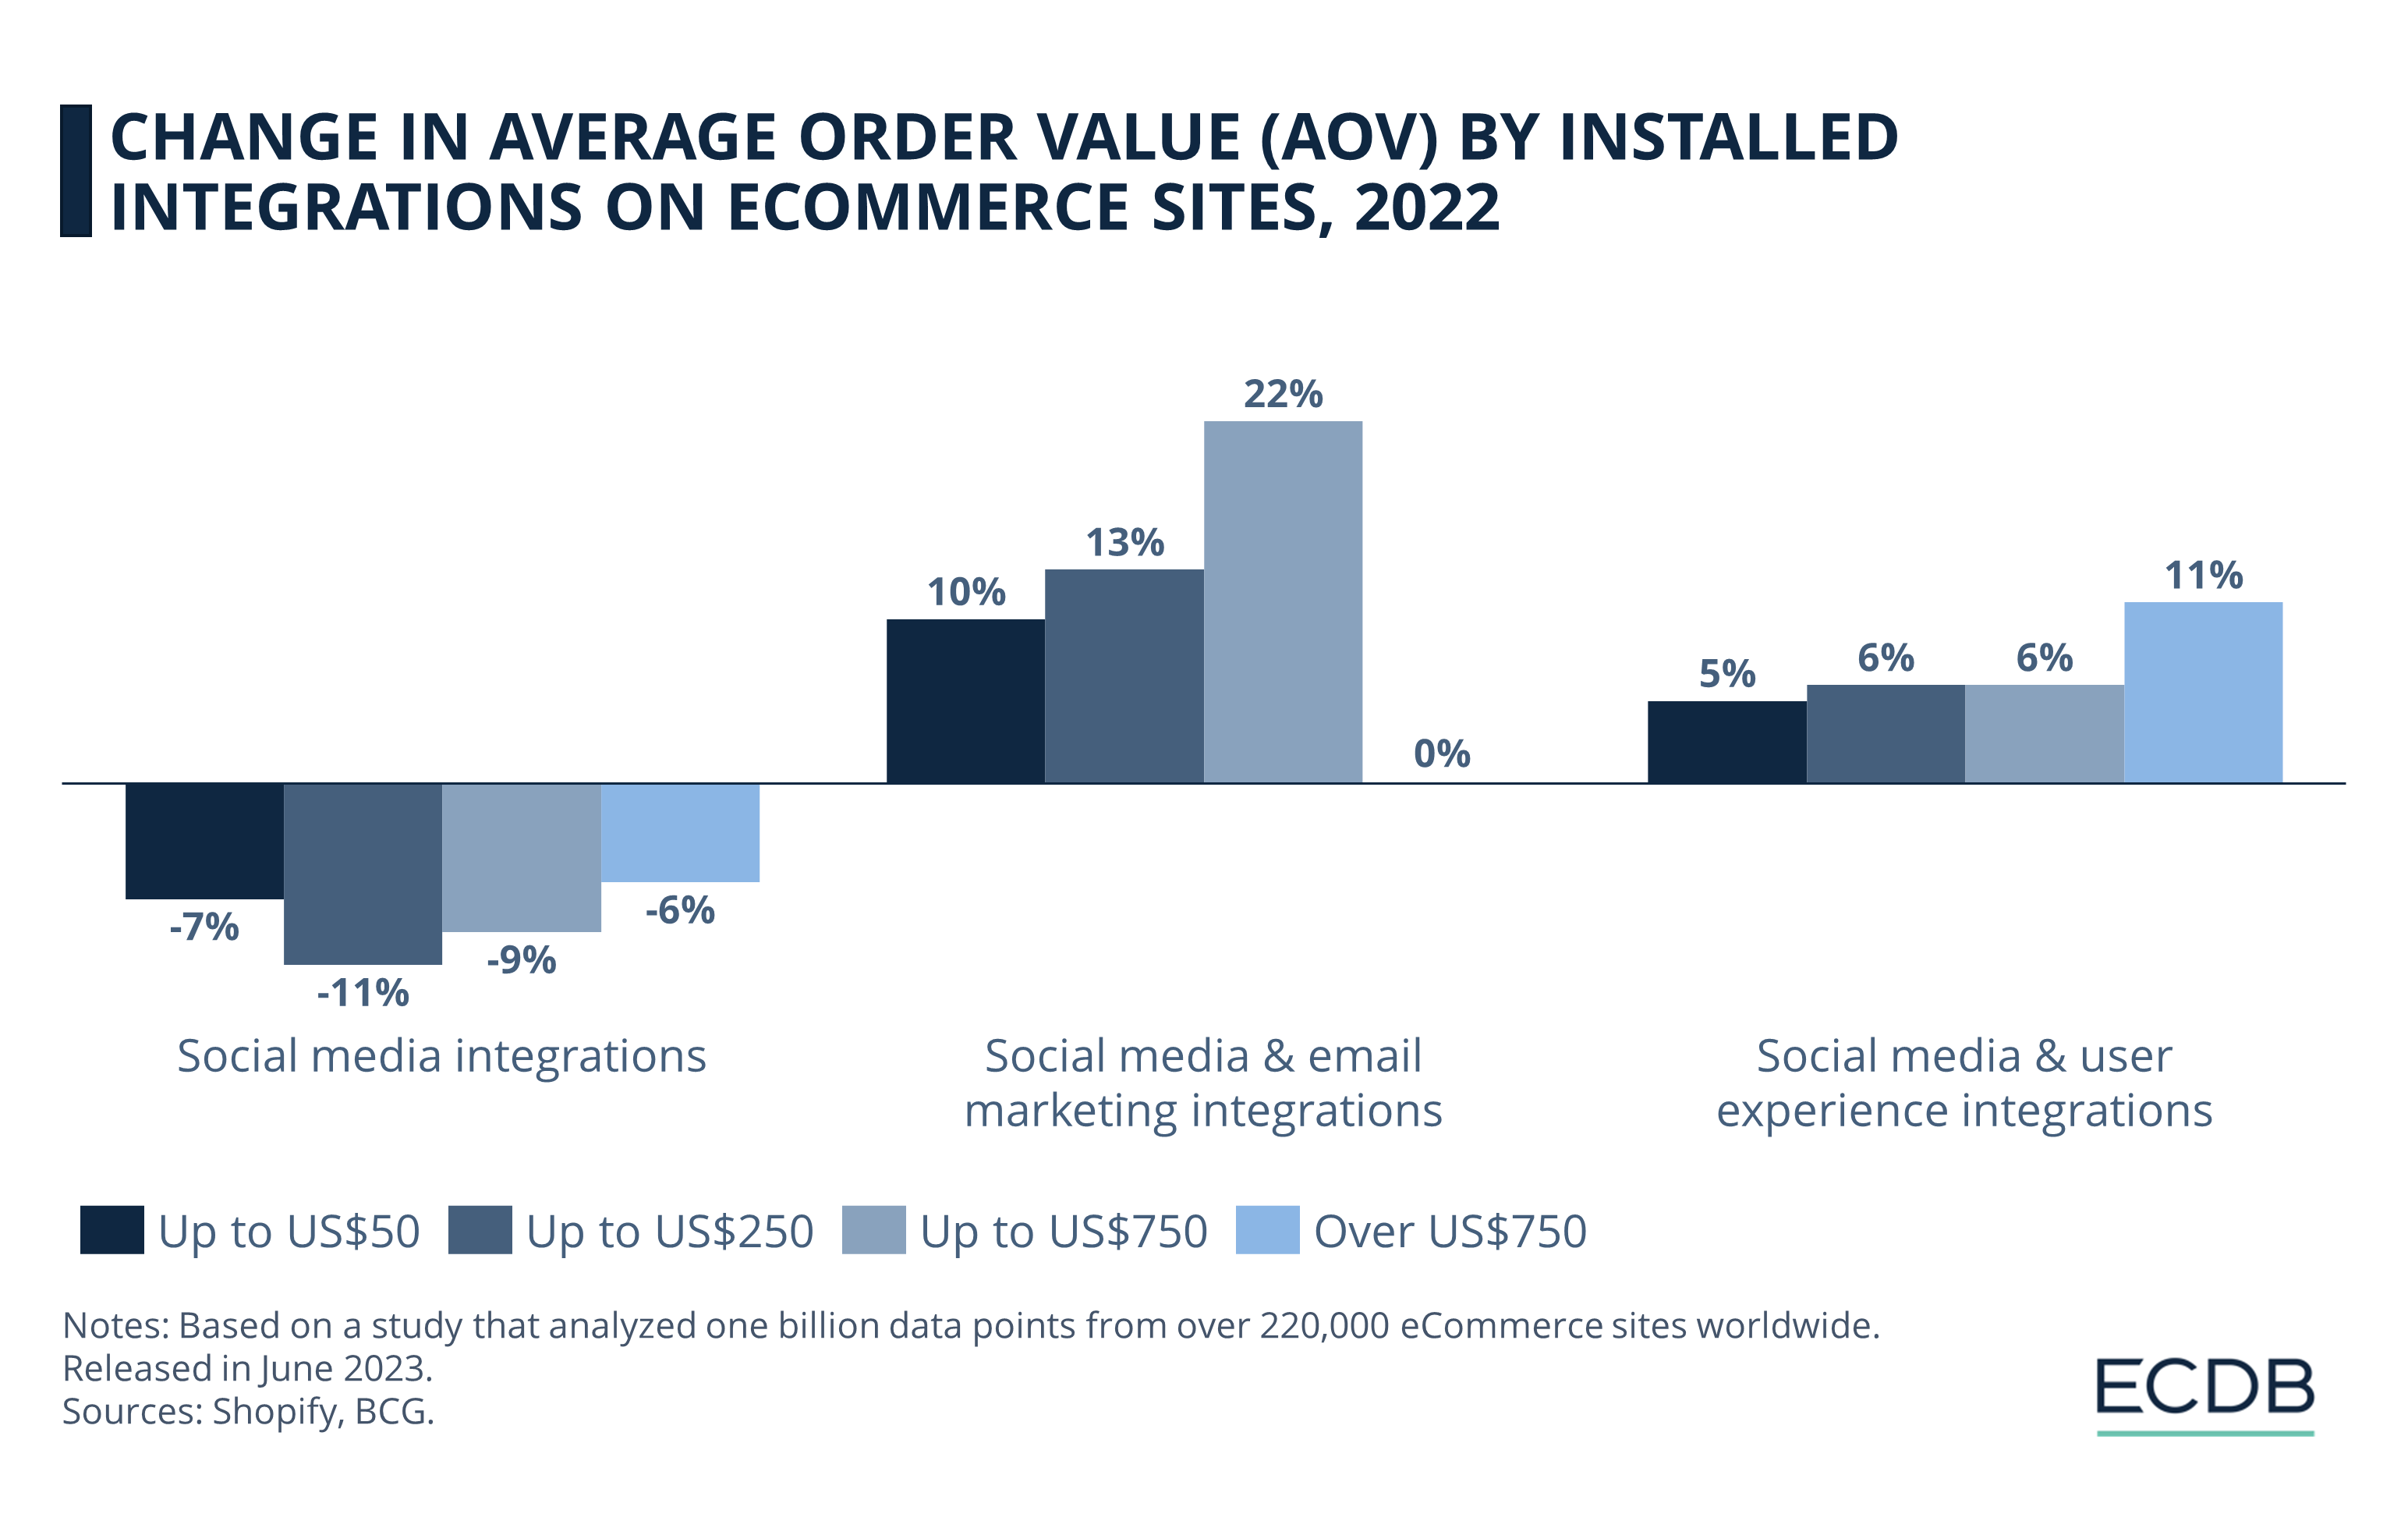 Change in Average Order Value (AOV) by Installed Integrations on eCommerce Sites, 2022